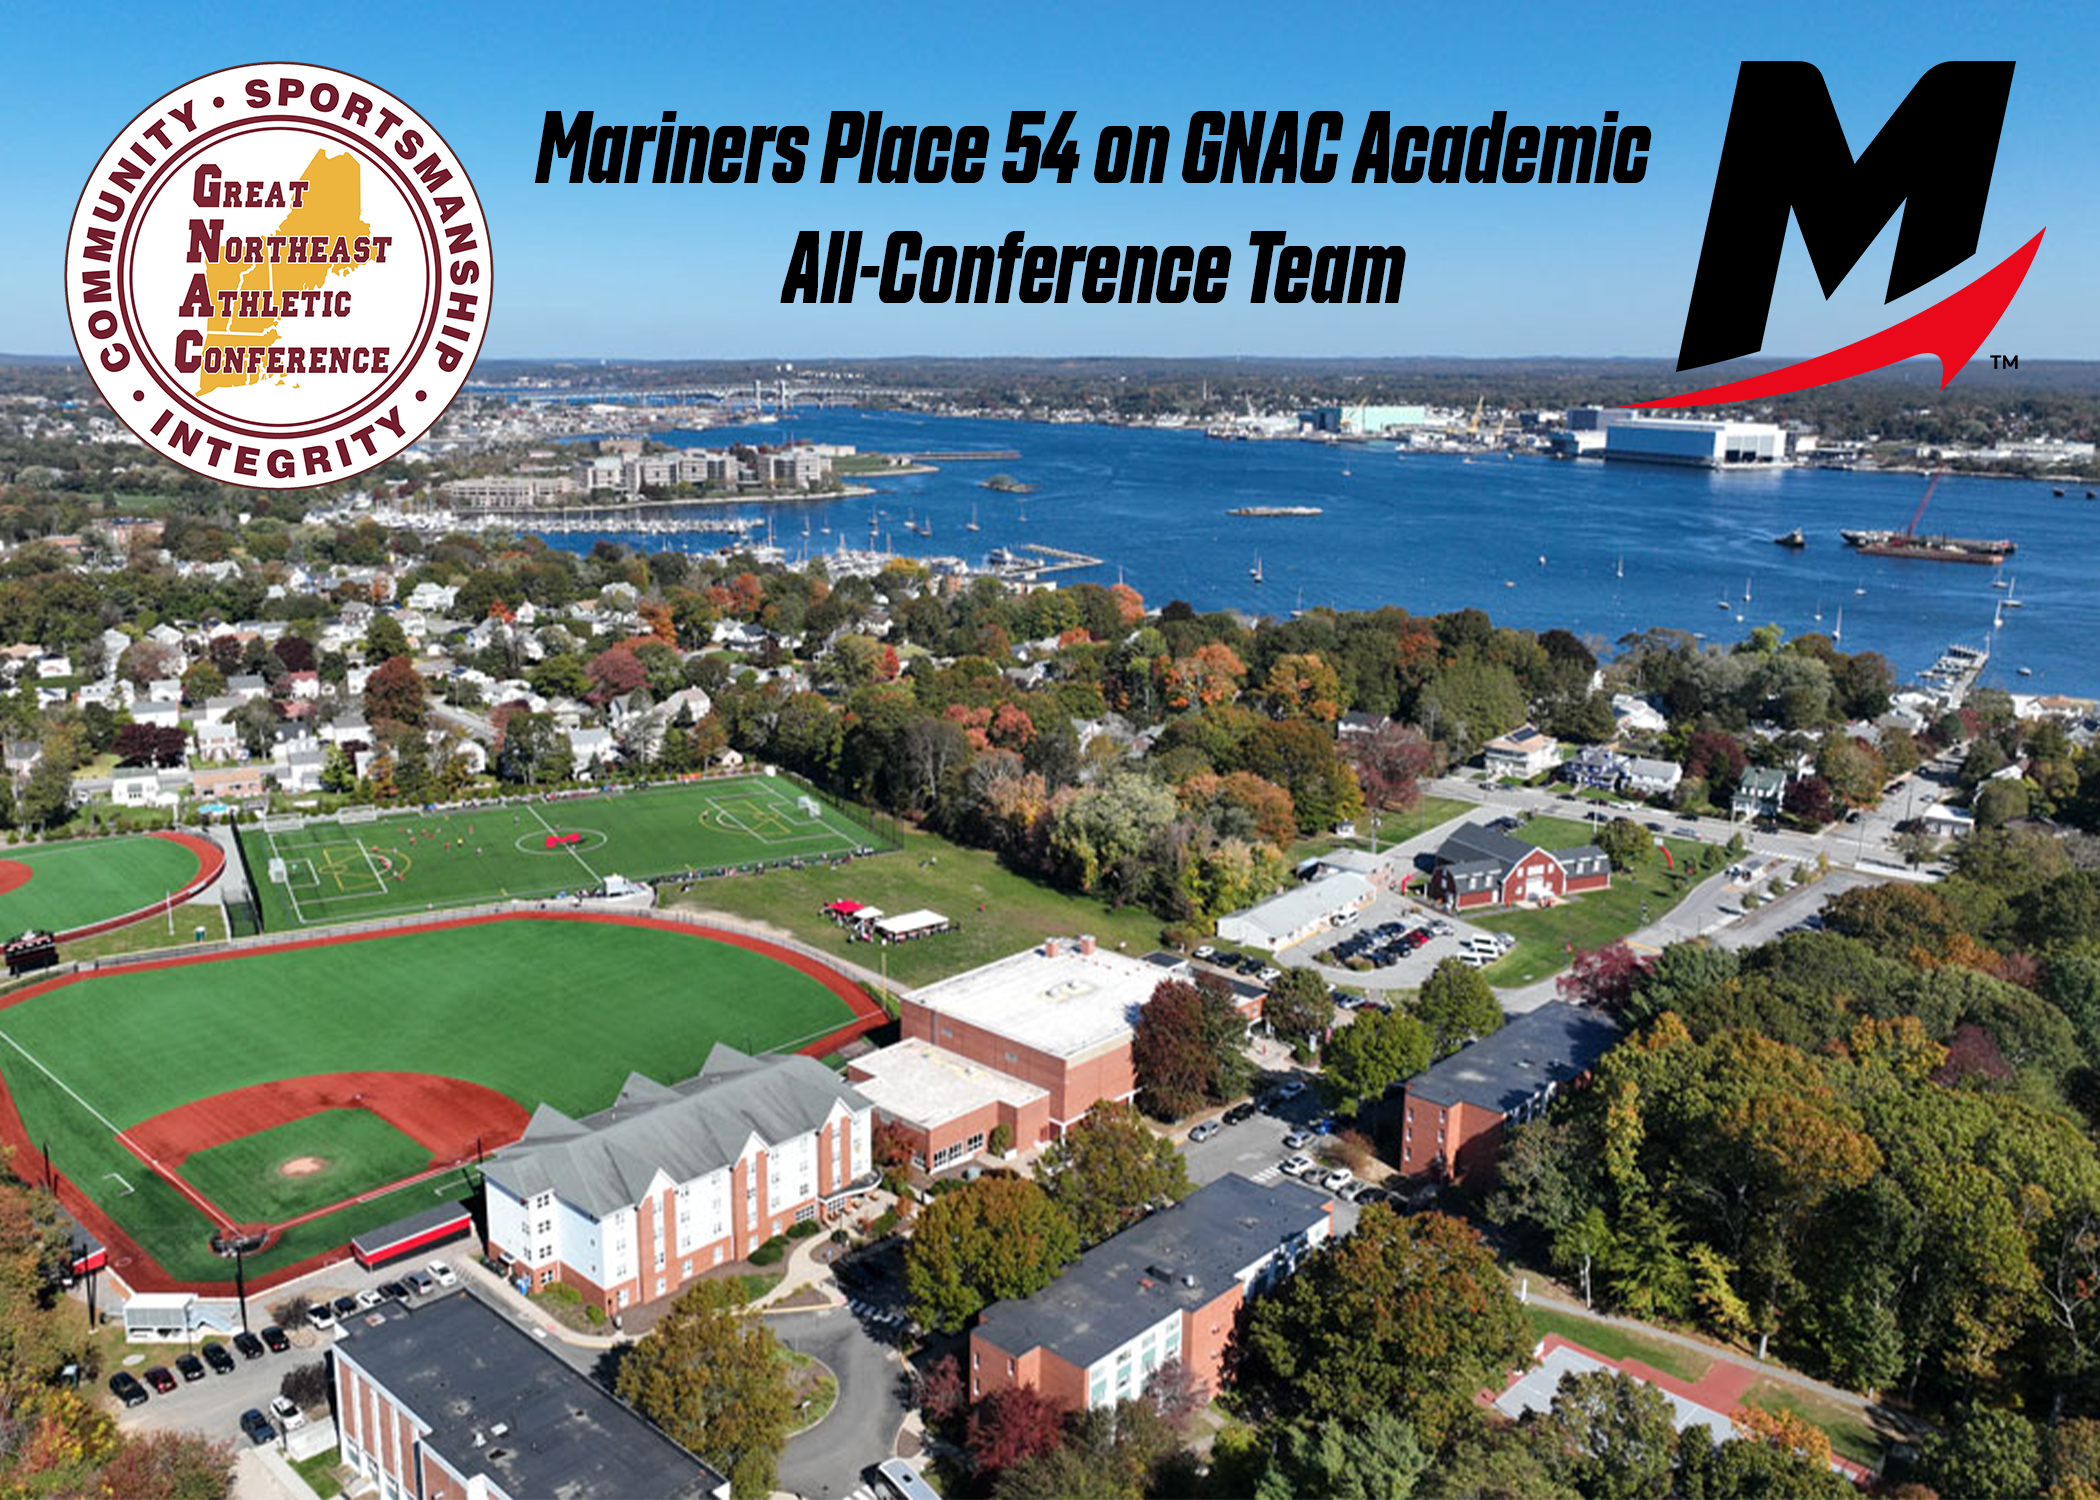 Mariners Place 54 on GNAC Academic All-Conference Team